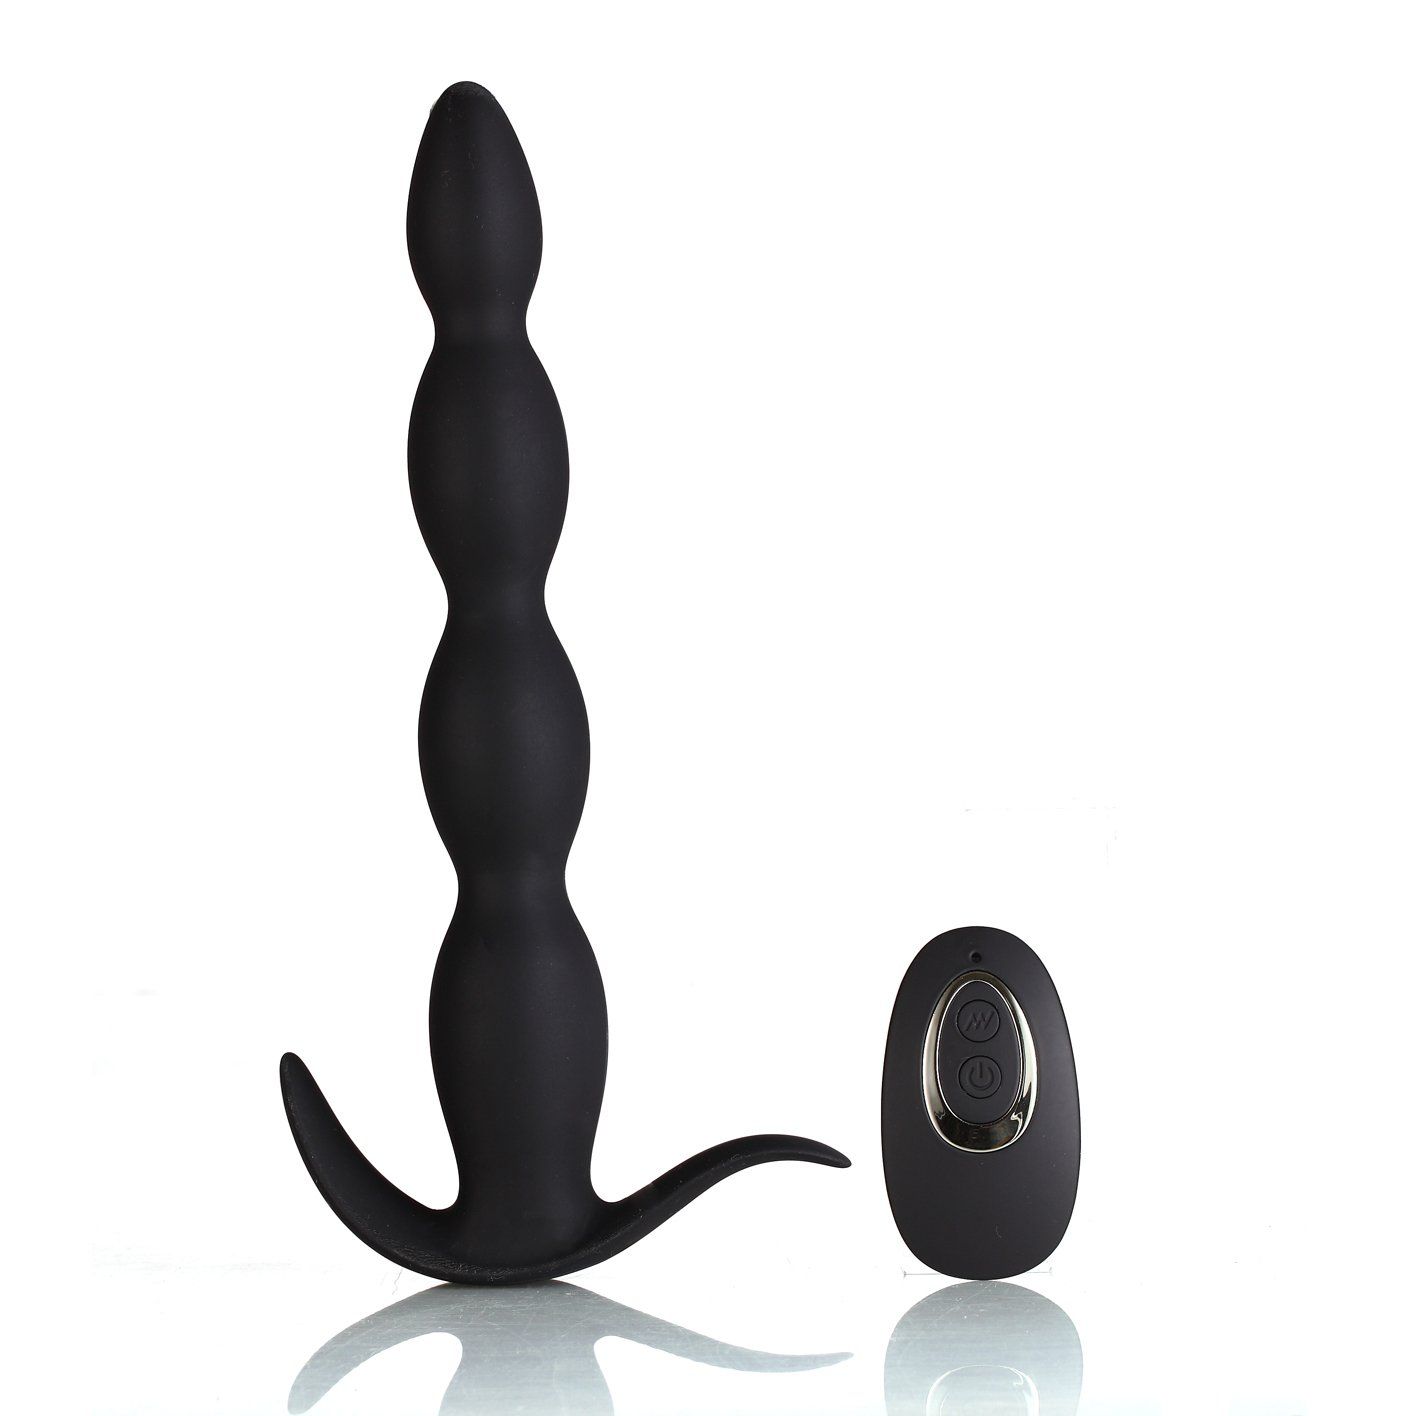 Maia mason - remote controlled anal beads - Product front view  | Flirtybay.com.au